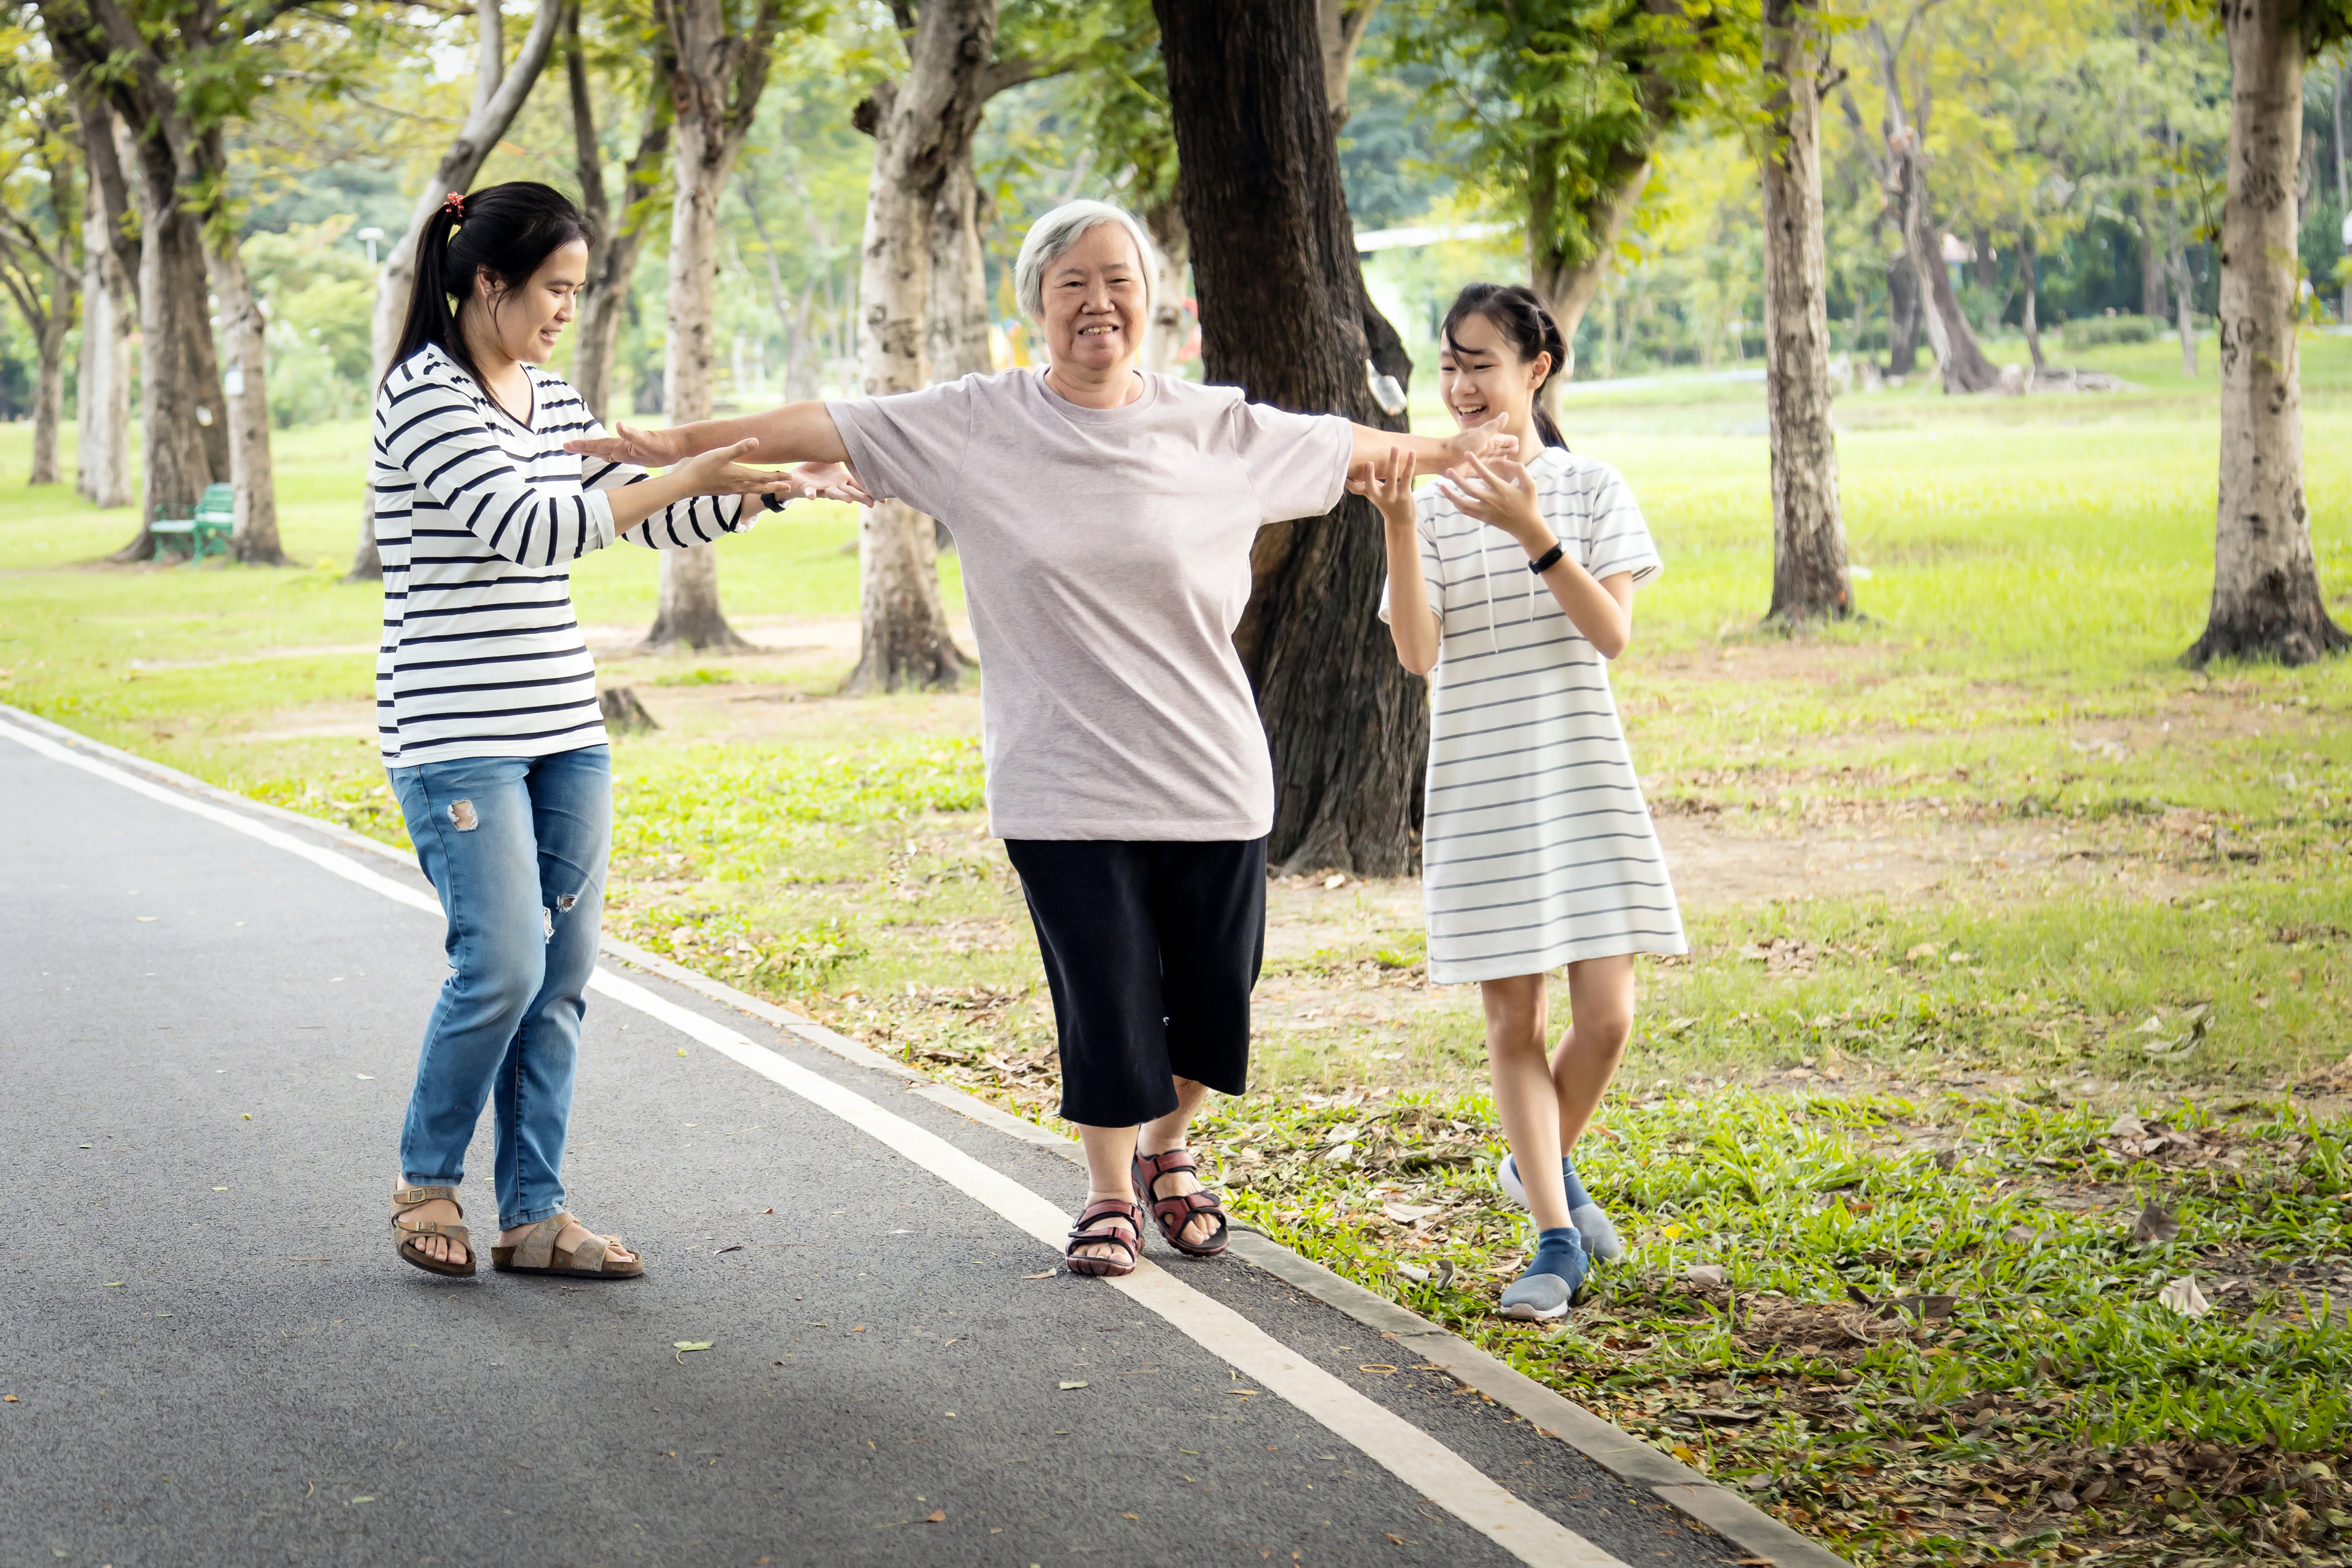 Three asian women walking together outside, a grandmother, mother, and daughter. The grandmother is balancing on a white line, testing for fall risk